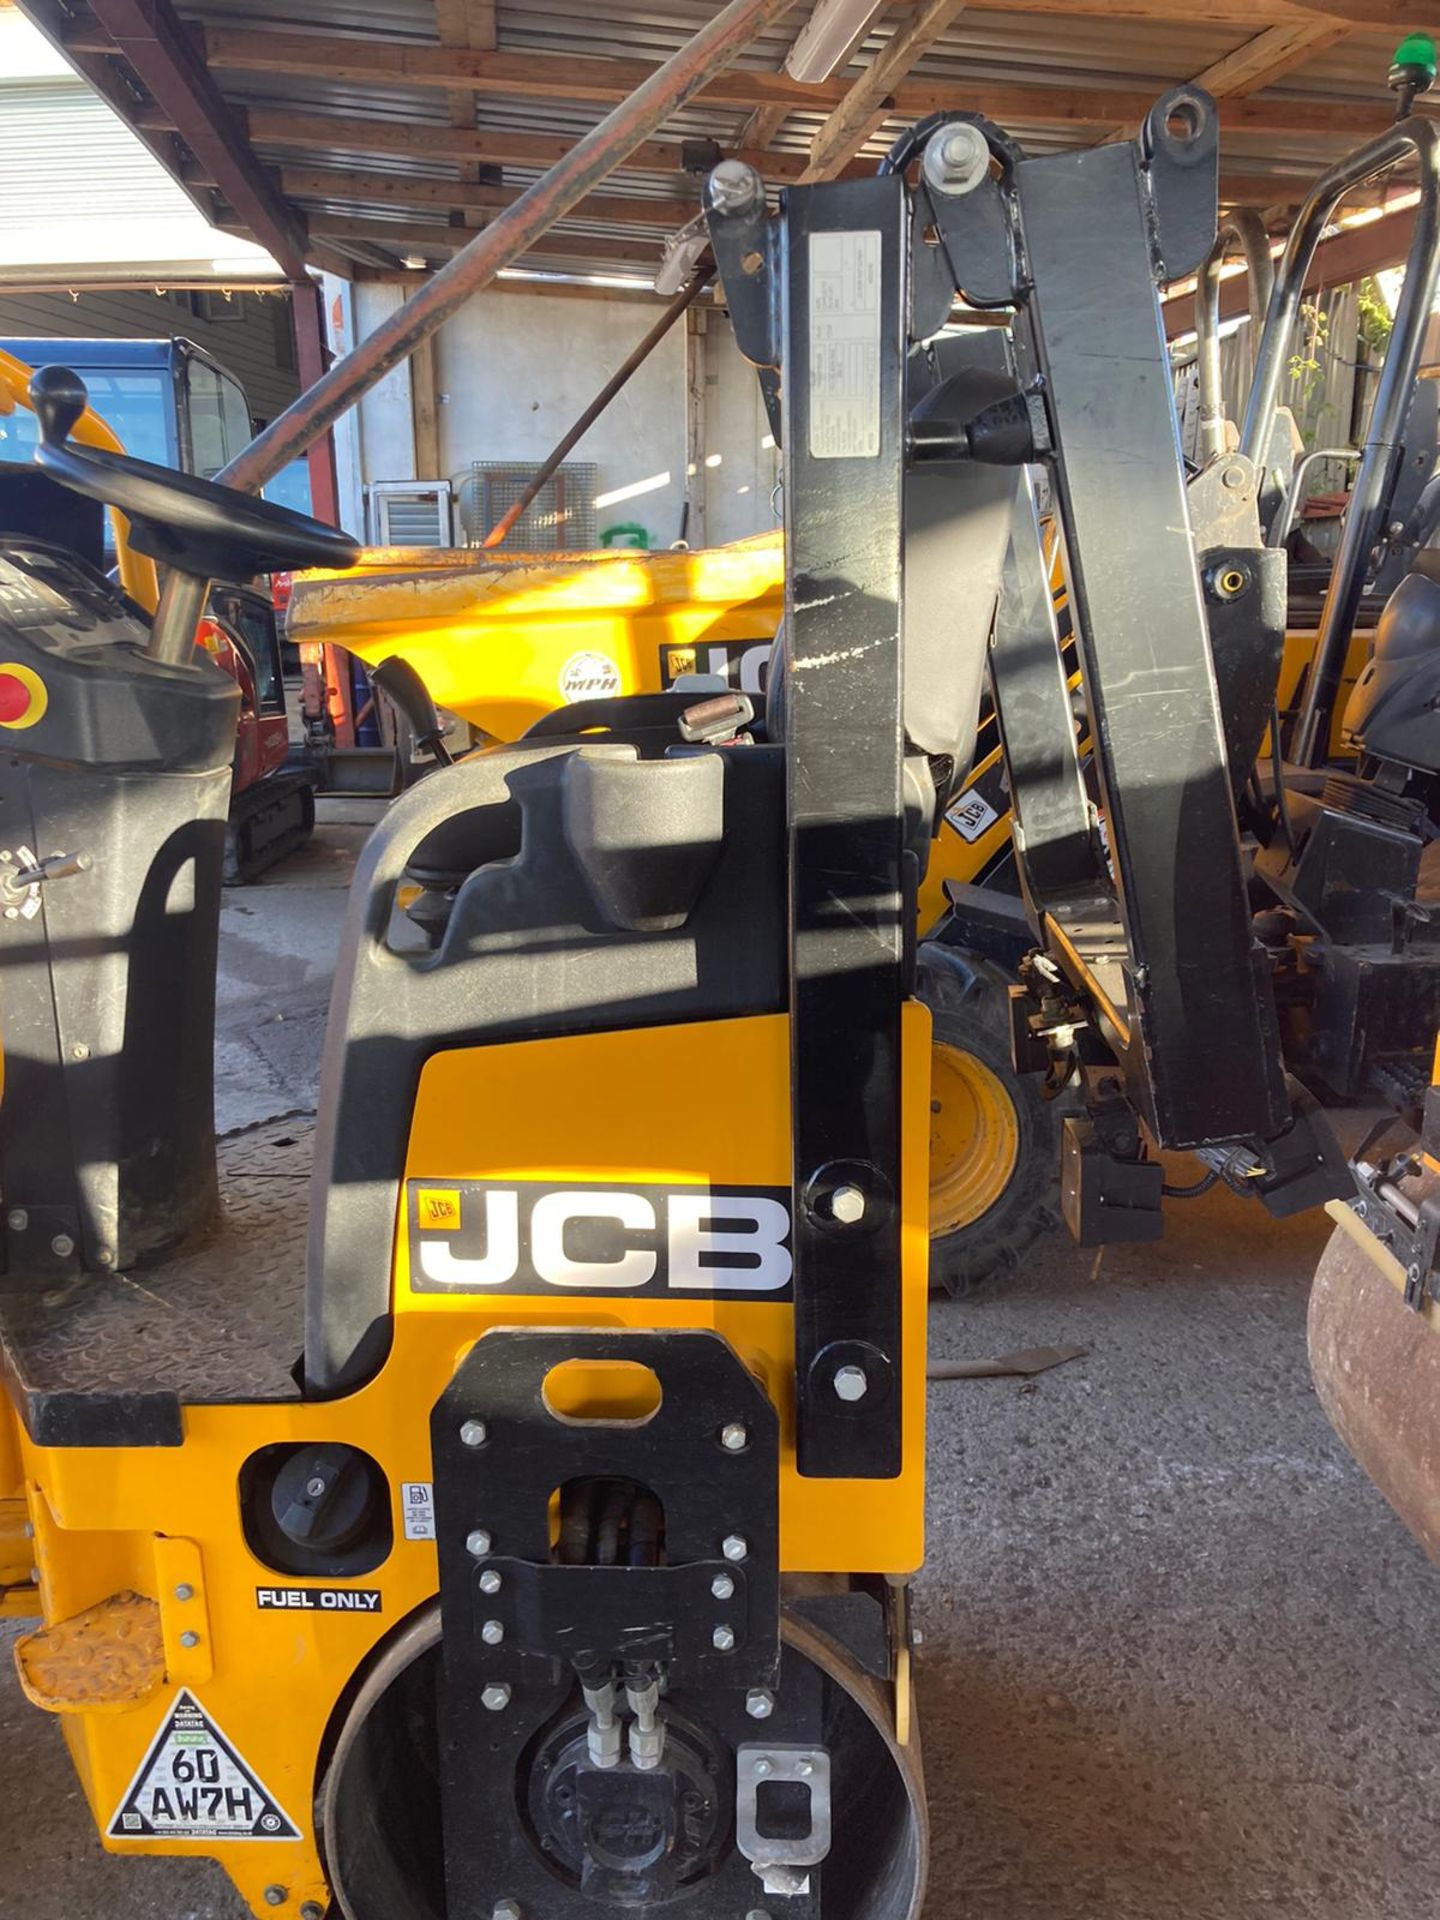 JCB CT160 DOUBLE DRUM ROLLER, YEAR 2019, 80 HOURS FROM NEW - Image 2 of 6